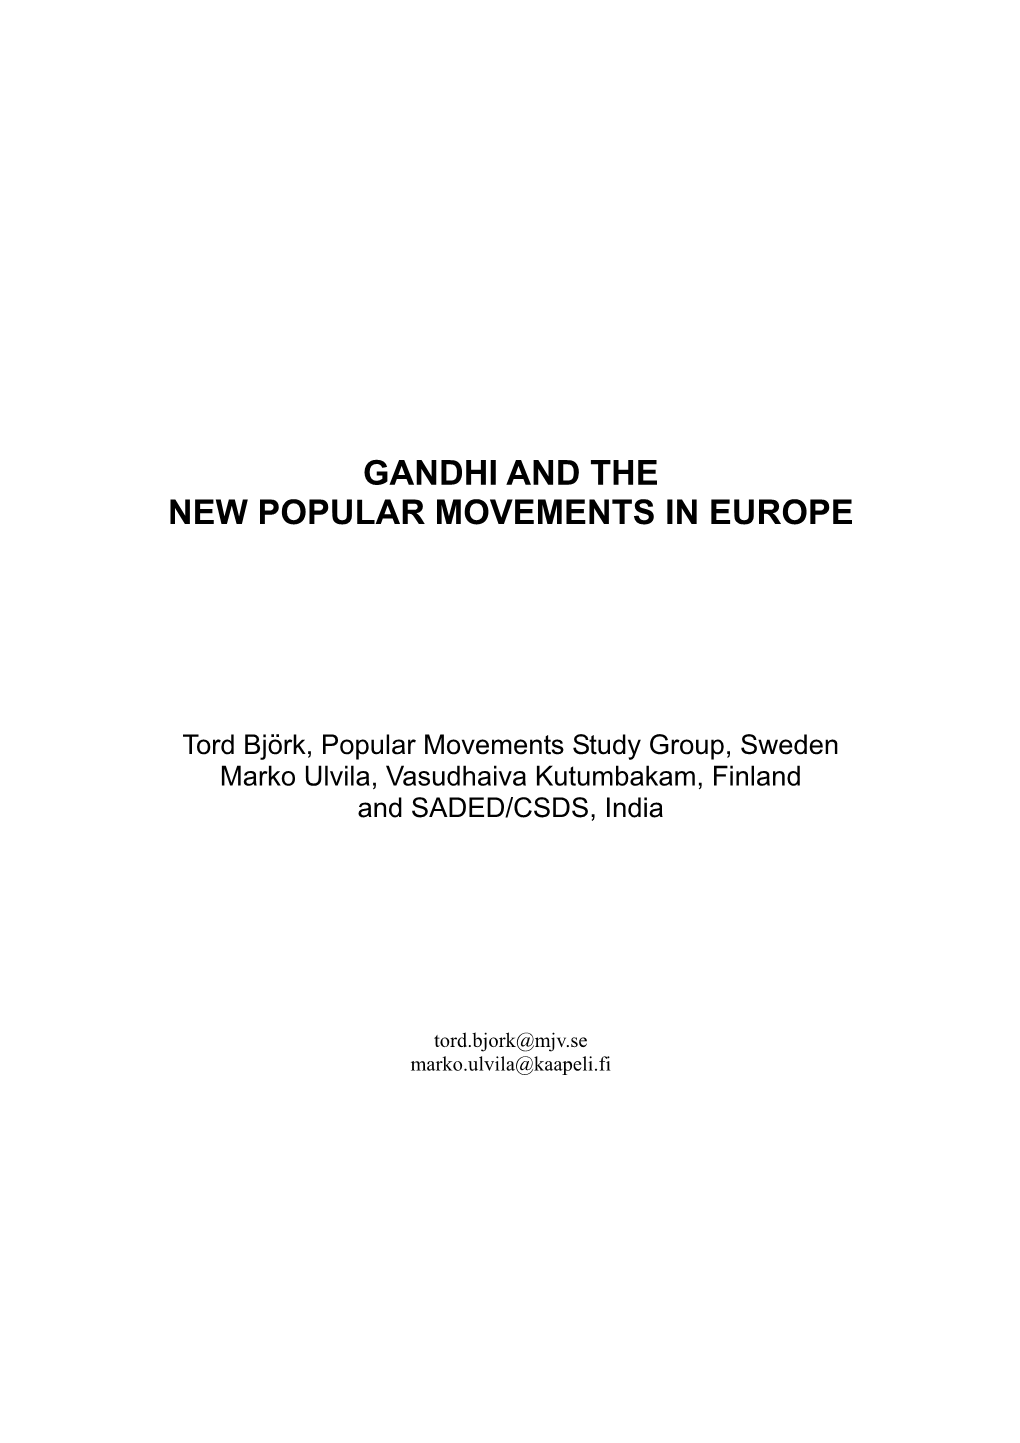 Gandhi and the New Popular Movements in Europe